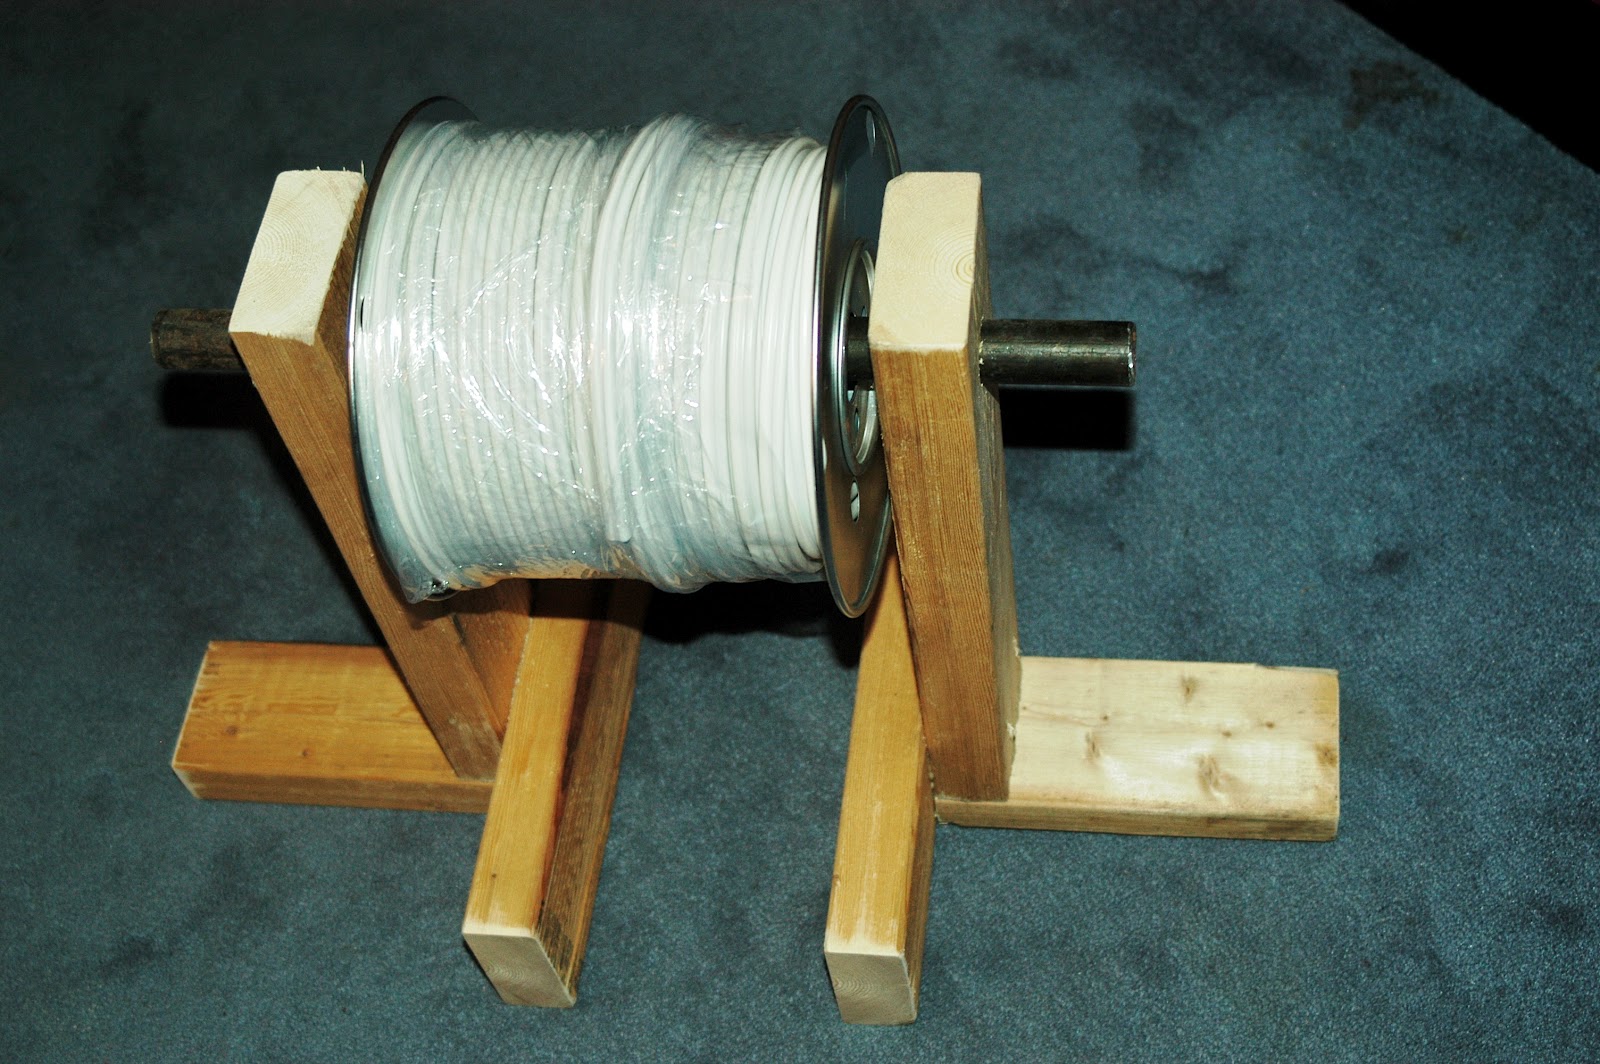 Electrical Adventures: Homemade Cable Reel Support